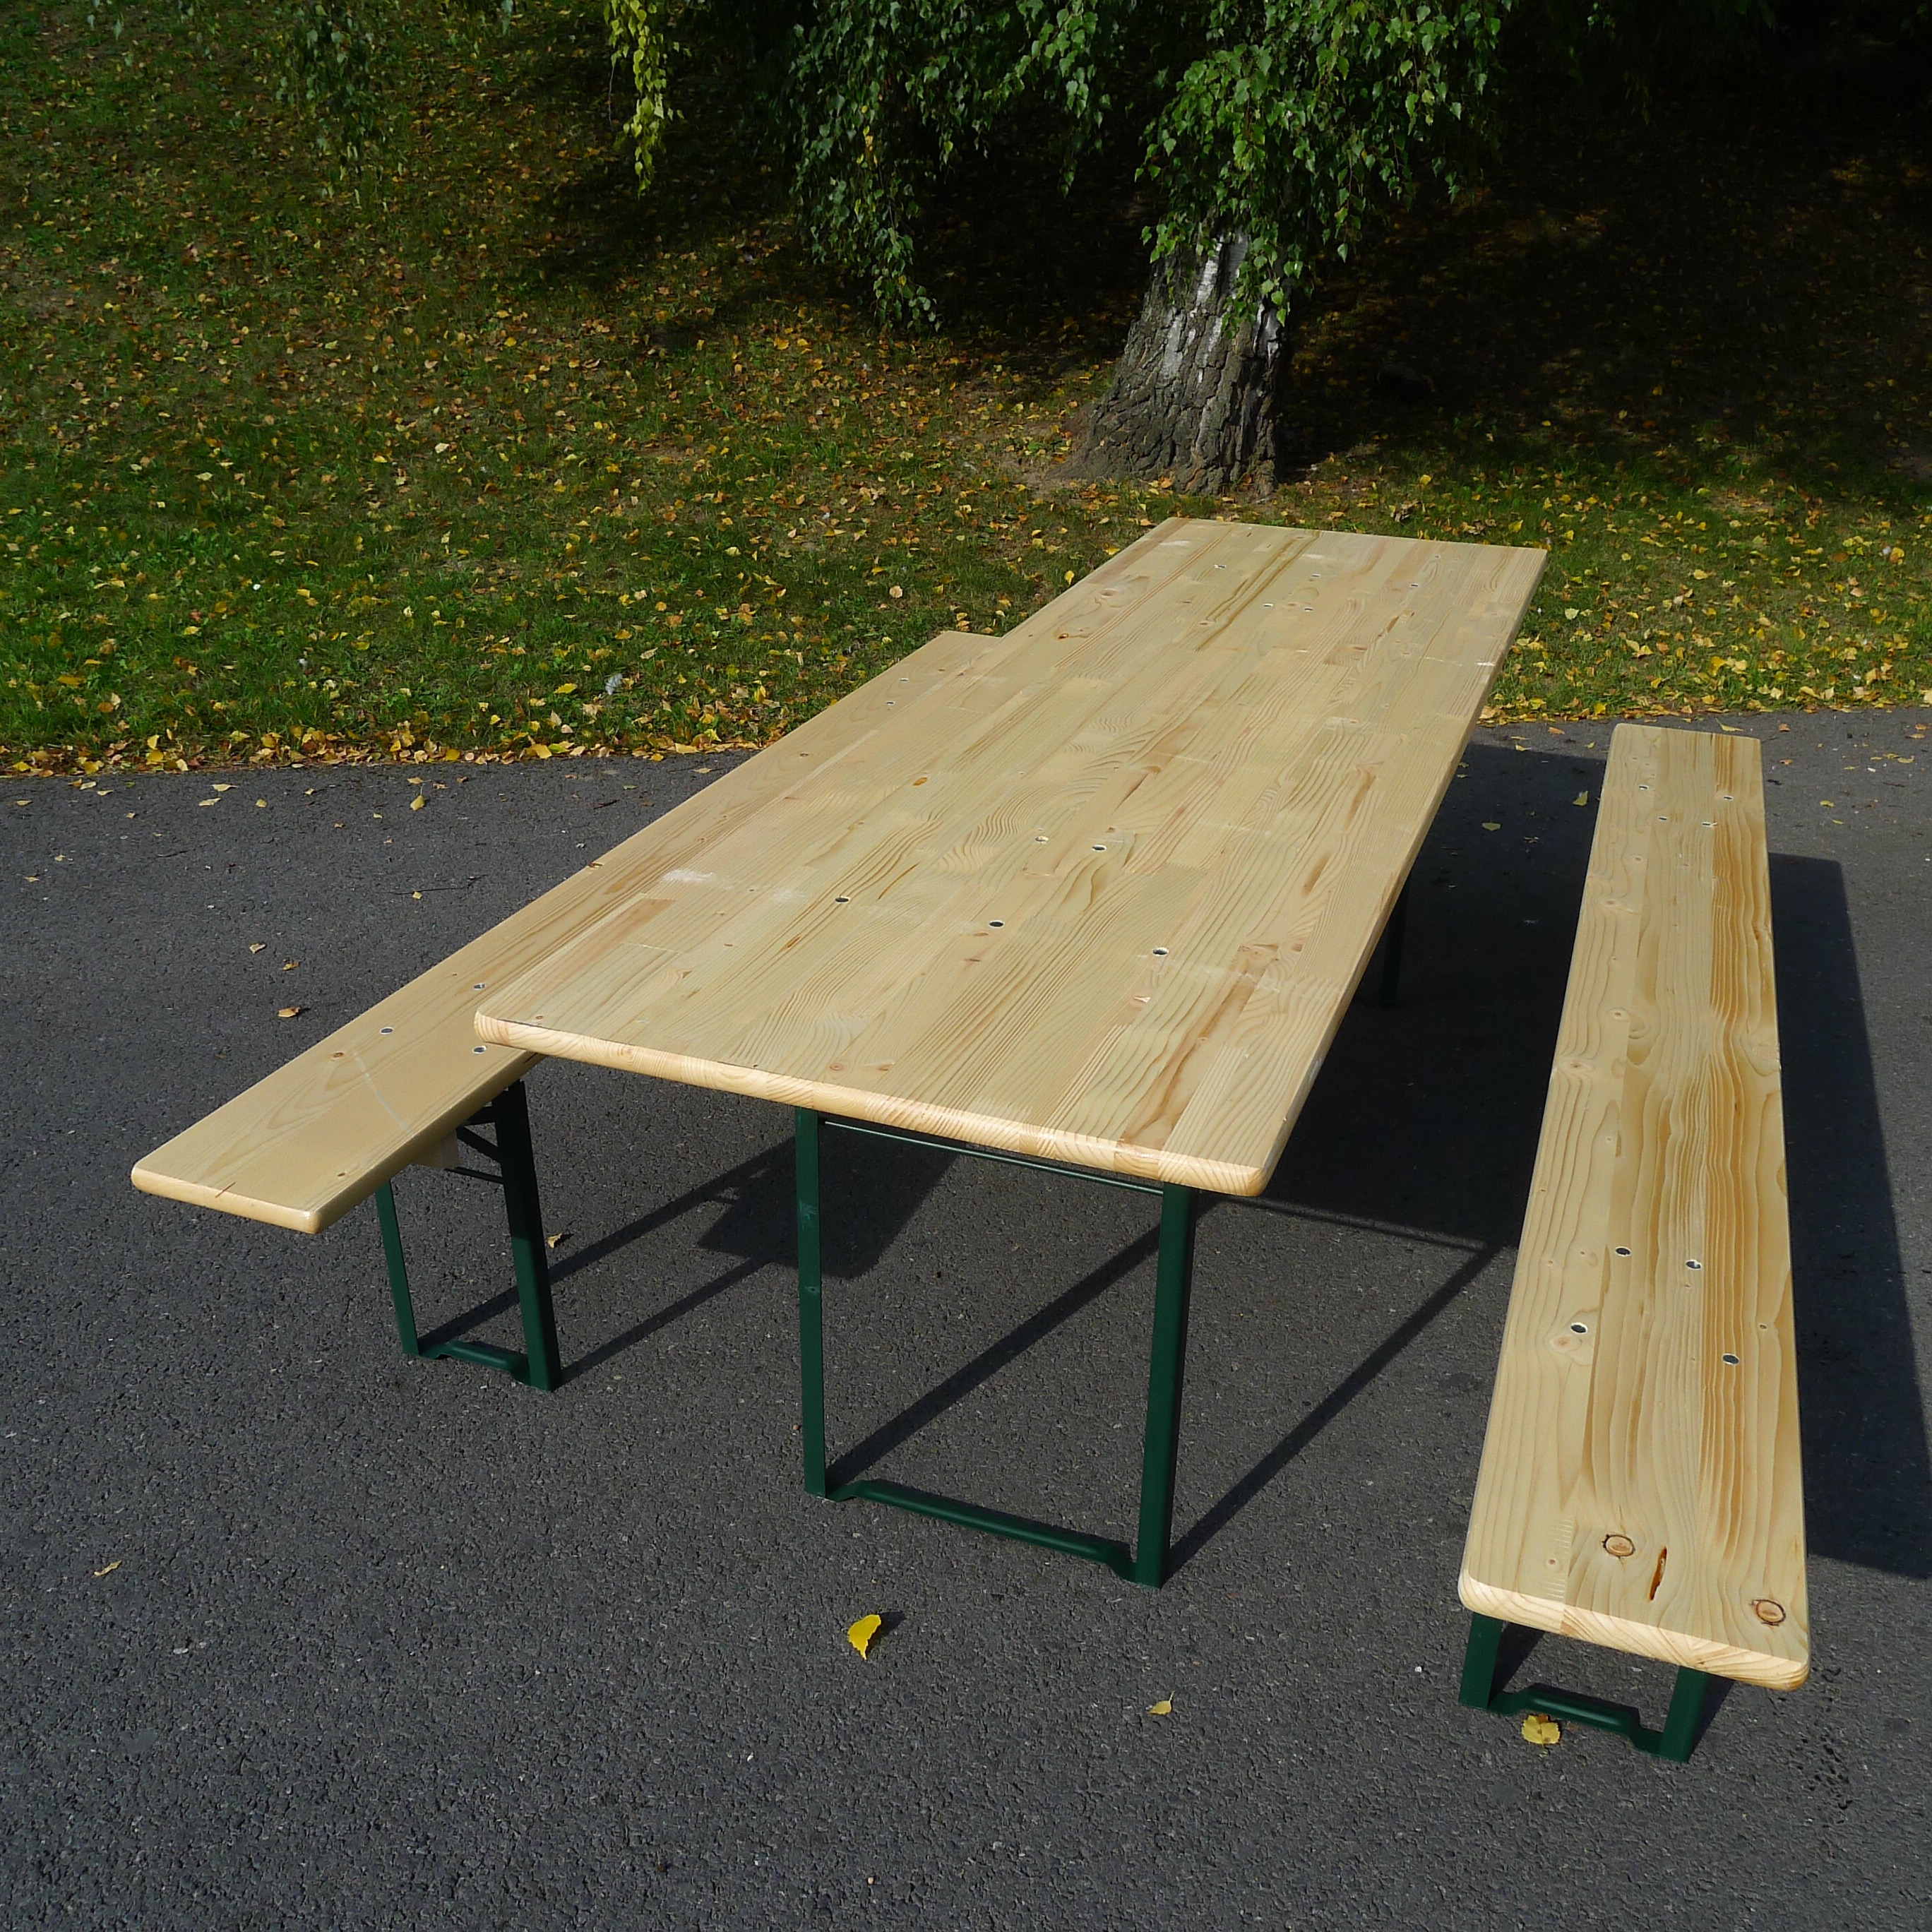 7,2ft Beer set table 220x70cm (benches sold separately) / steel corner legs